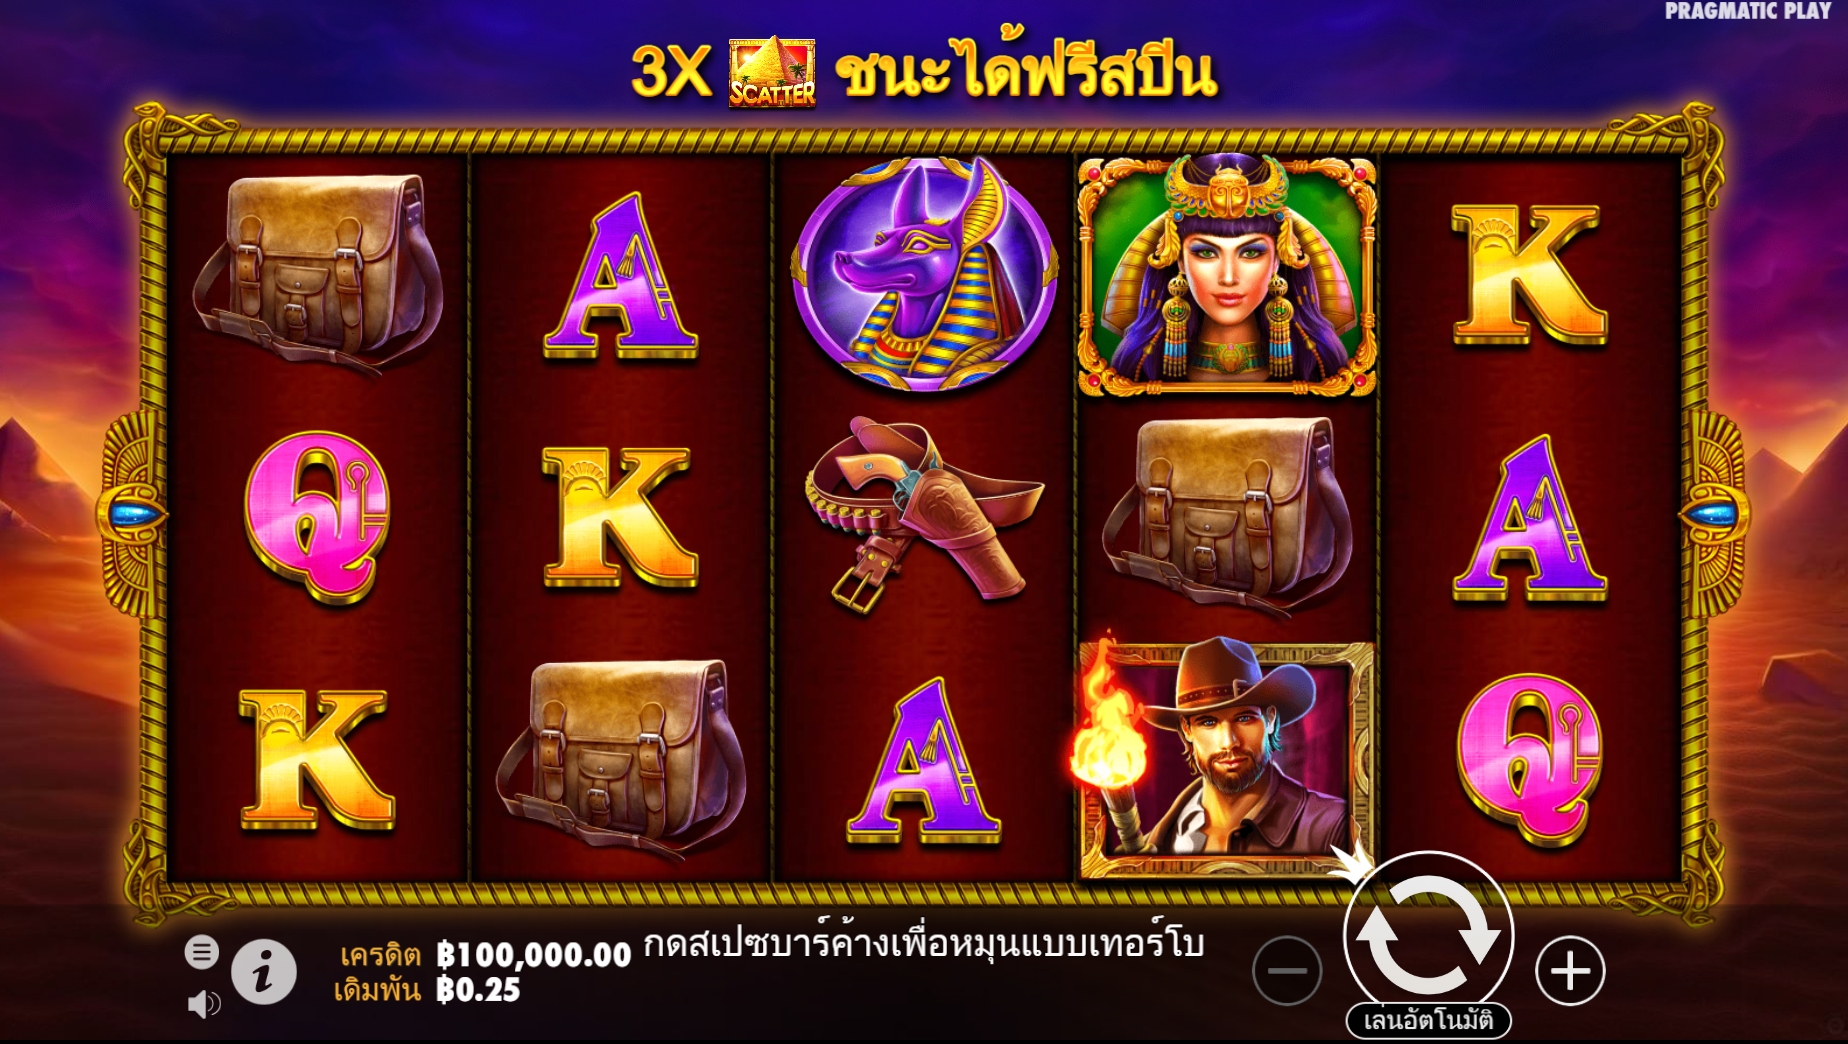 pragmatic play ฟรีเครดิต John Hunter and the Tomb of the Scarab Queen เครดิตฟรี 300